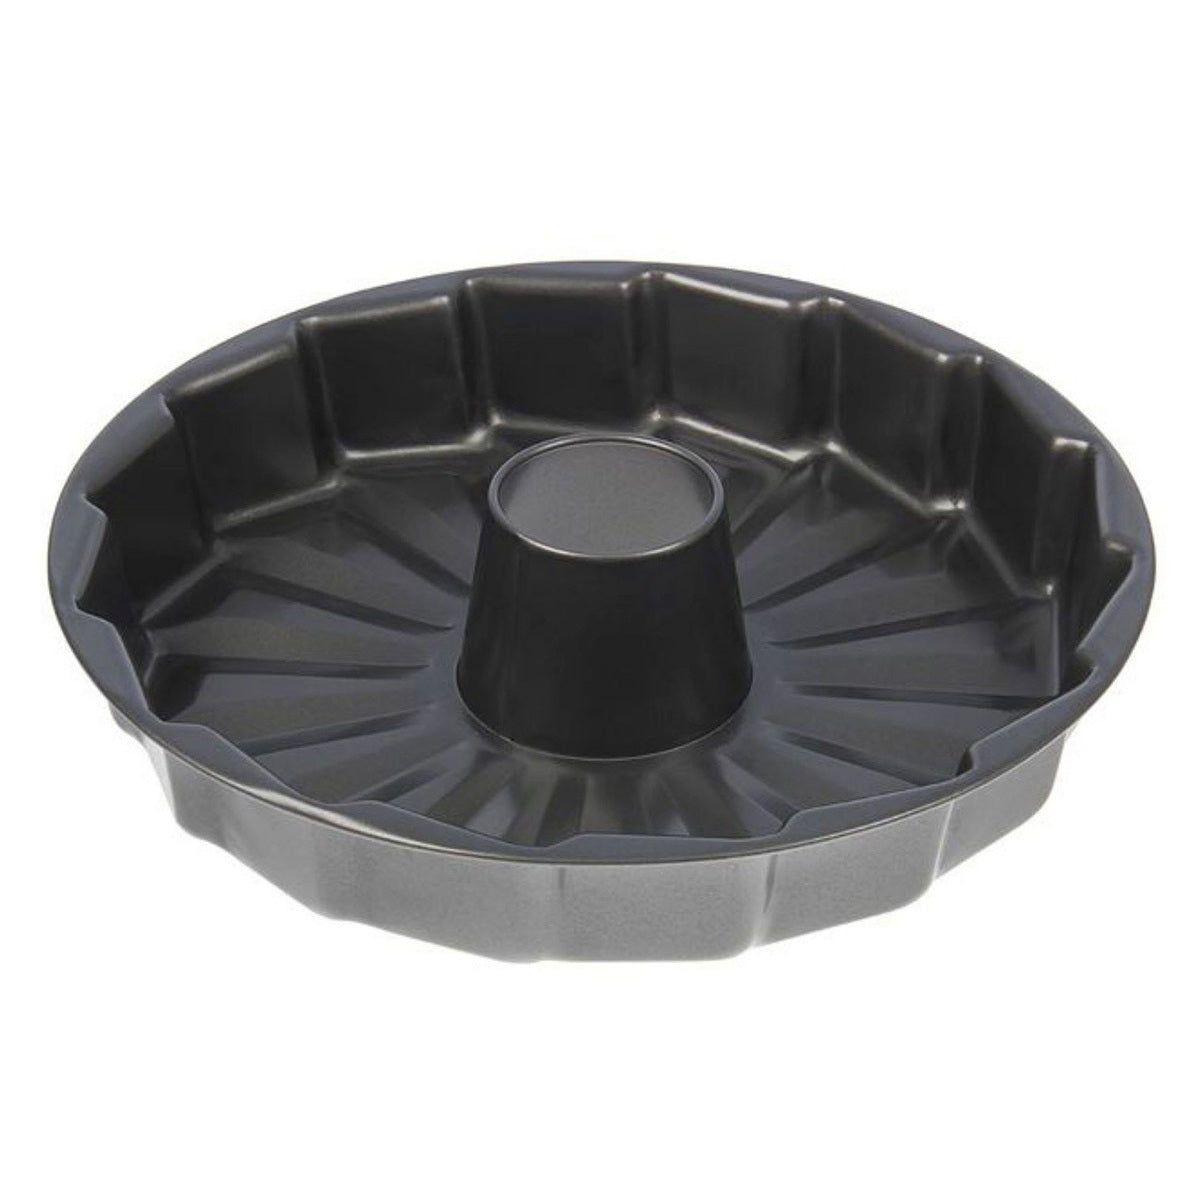 Fluted Cake Ring Pan Round Large Size Non Stick